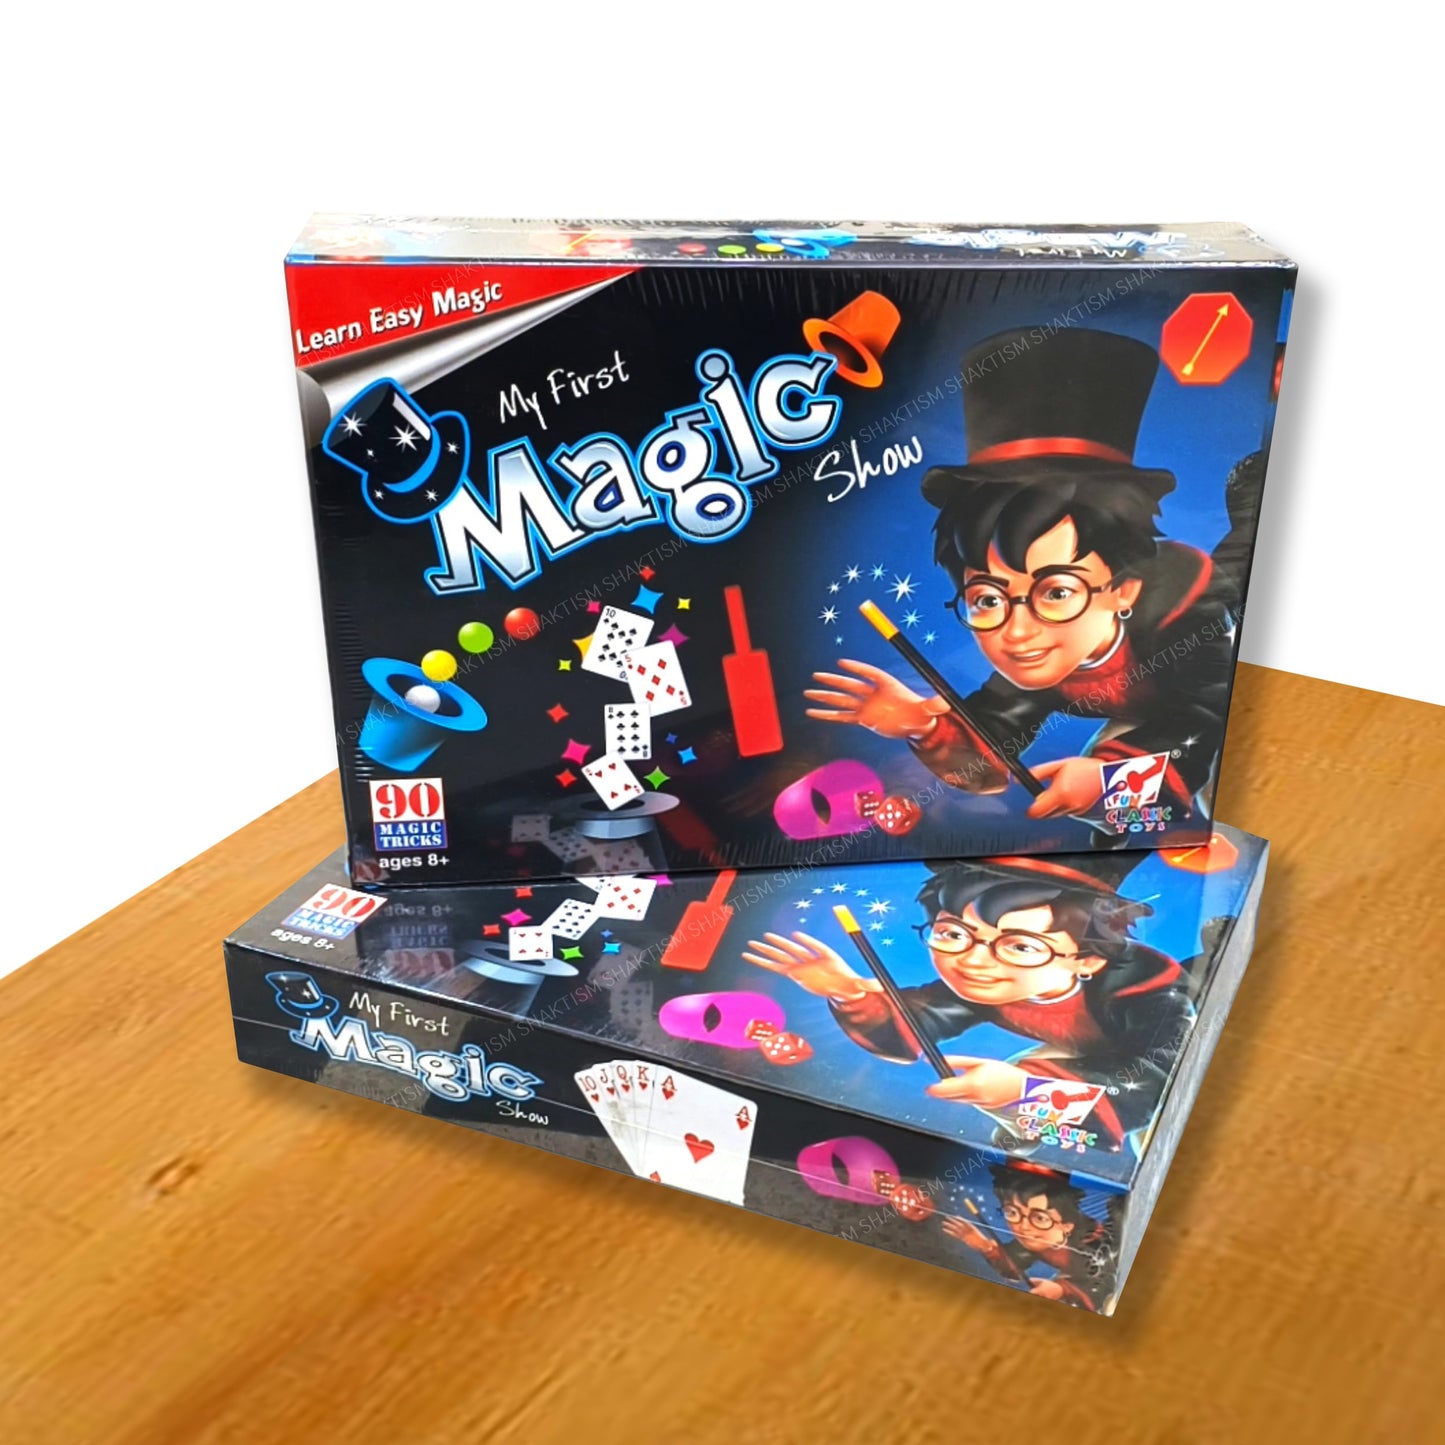 My First Magic Show Game Box with 90 Tricks